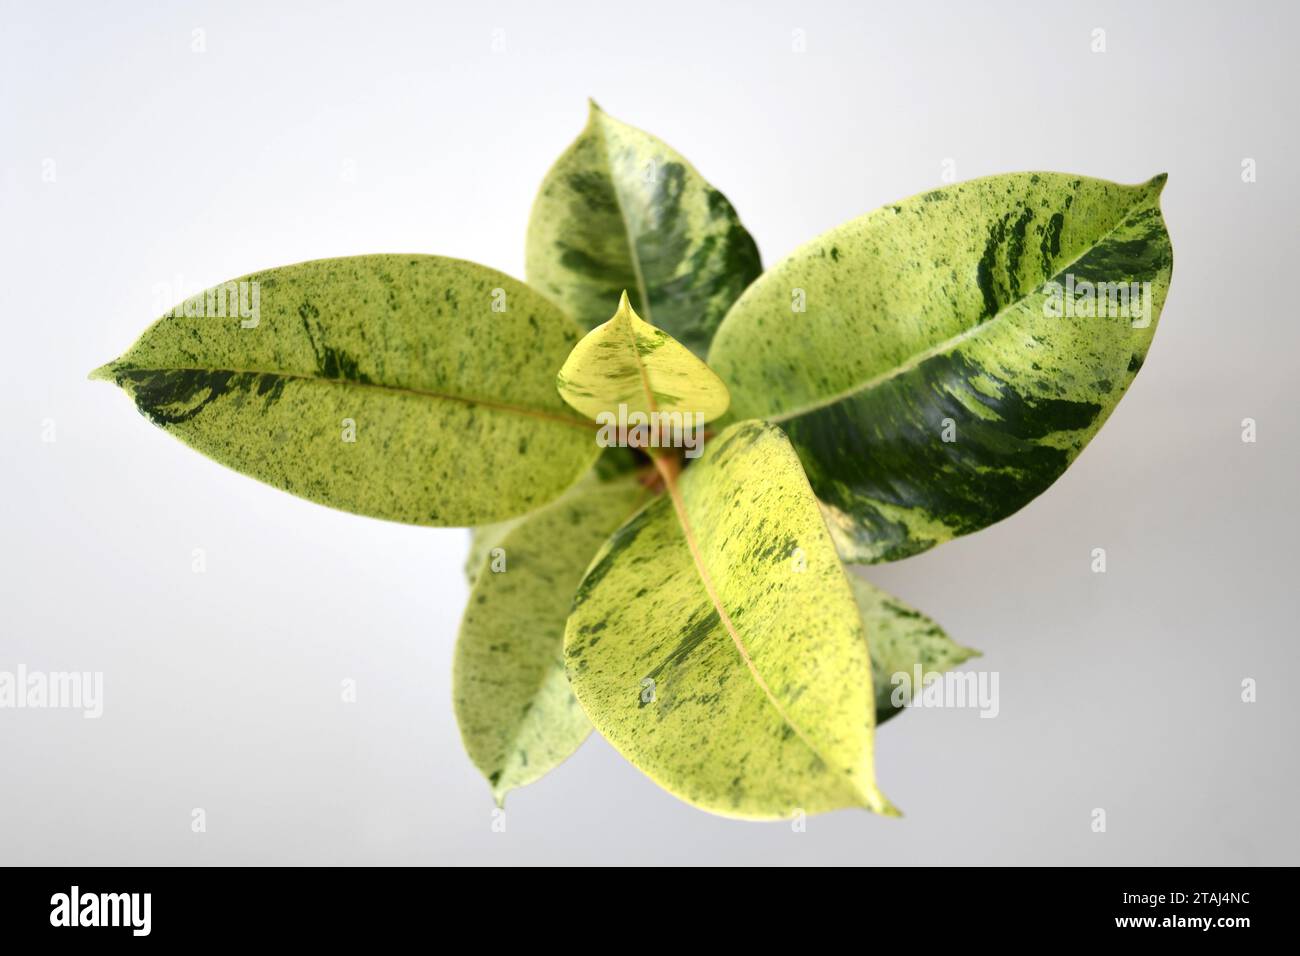 Ficus elastica moonshine (rubber tree) houseplant with variegated green and yellow leaves. Isolated on a white background. Portrait orientation. Stock Photo